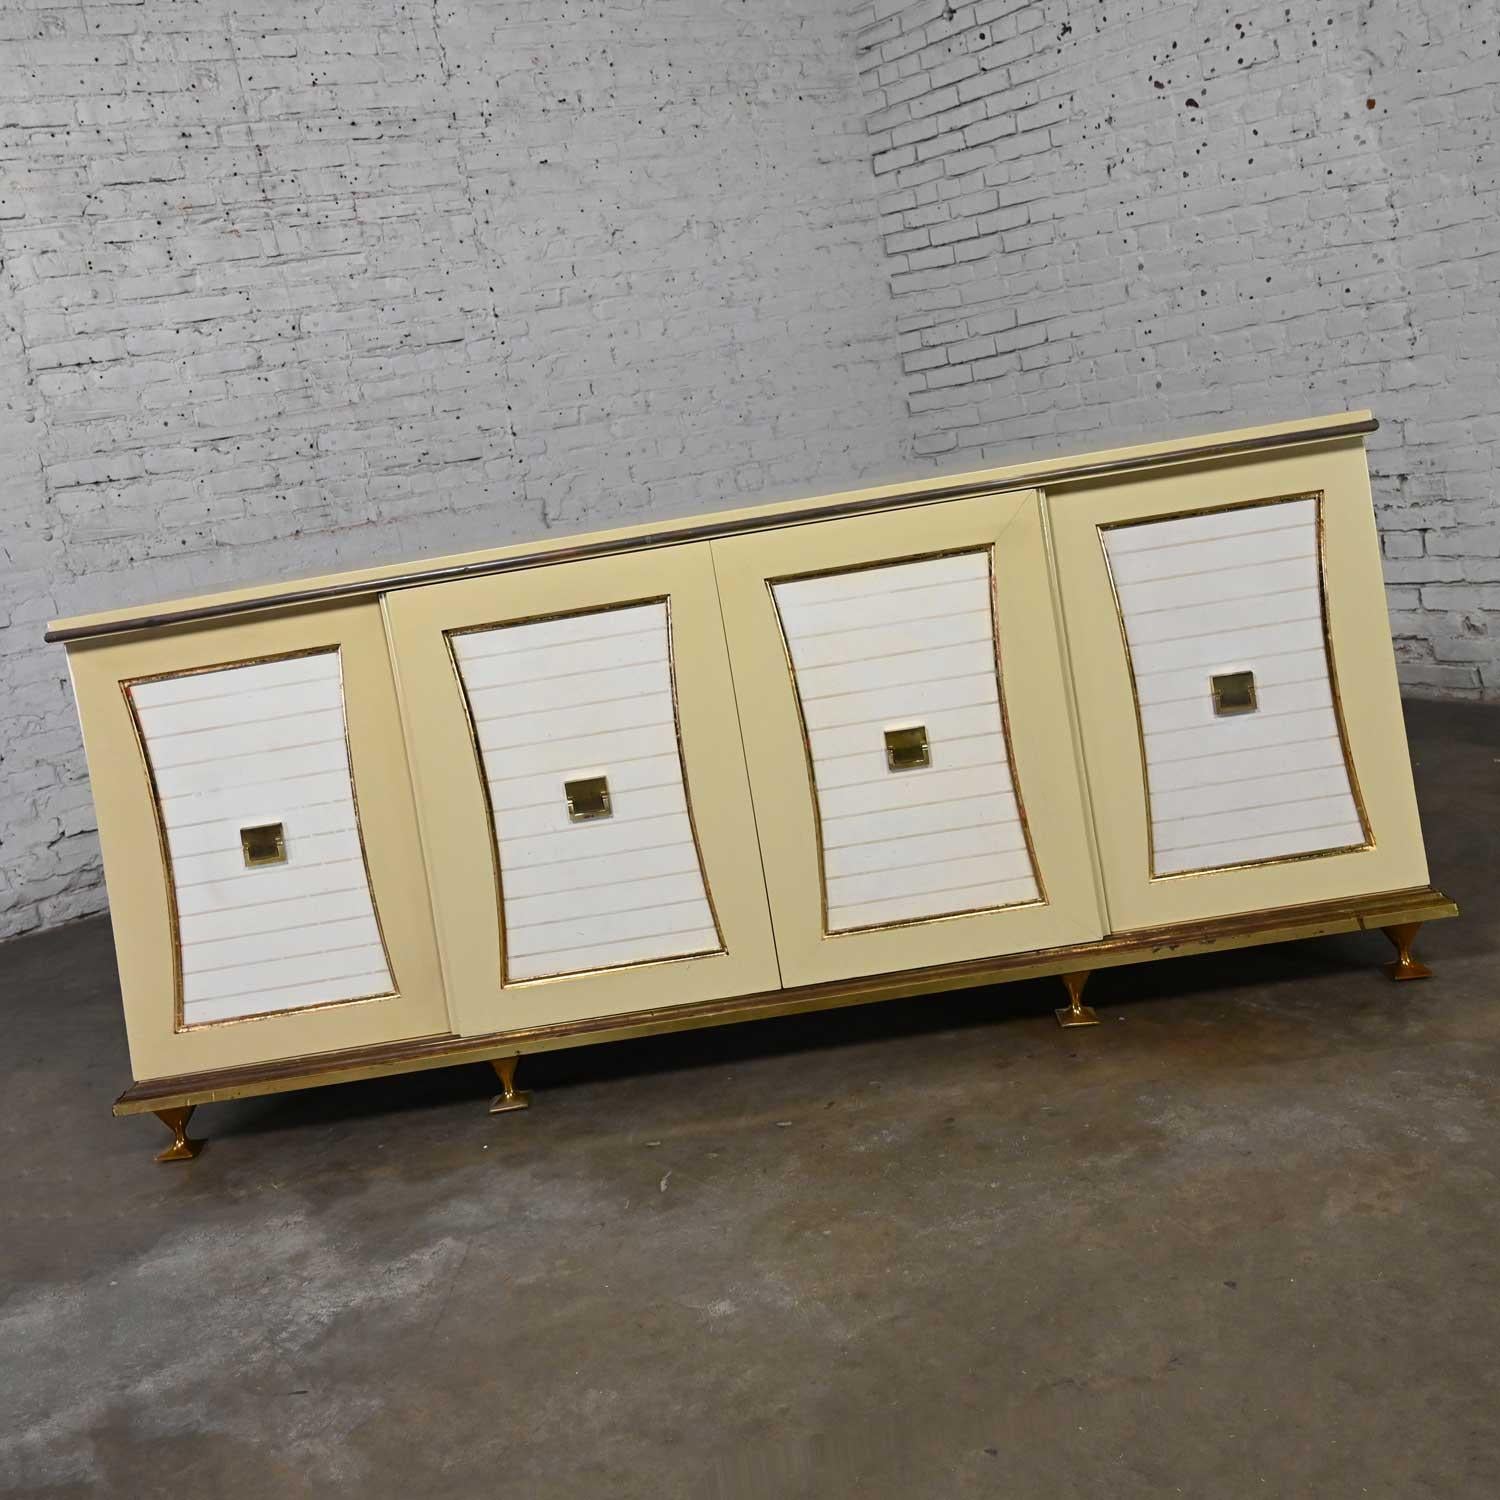 Gorgeous vintage Hollywood Regency Art Deco credenza or dresser by Renzo Rutili for Johnson Furniture comprised of an off-white painted top, ends & front of door frames; white gold embossed leather door panels; faux marbleized lacquered drawer